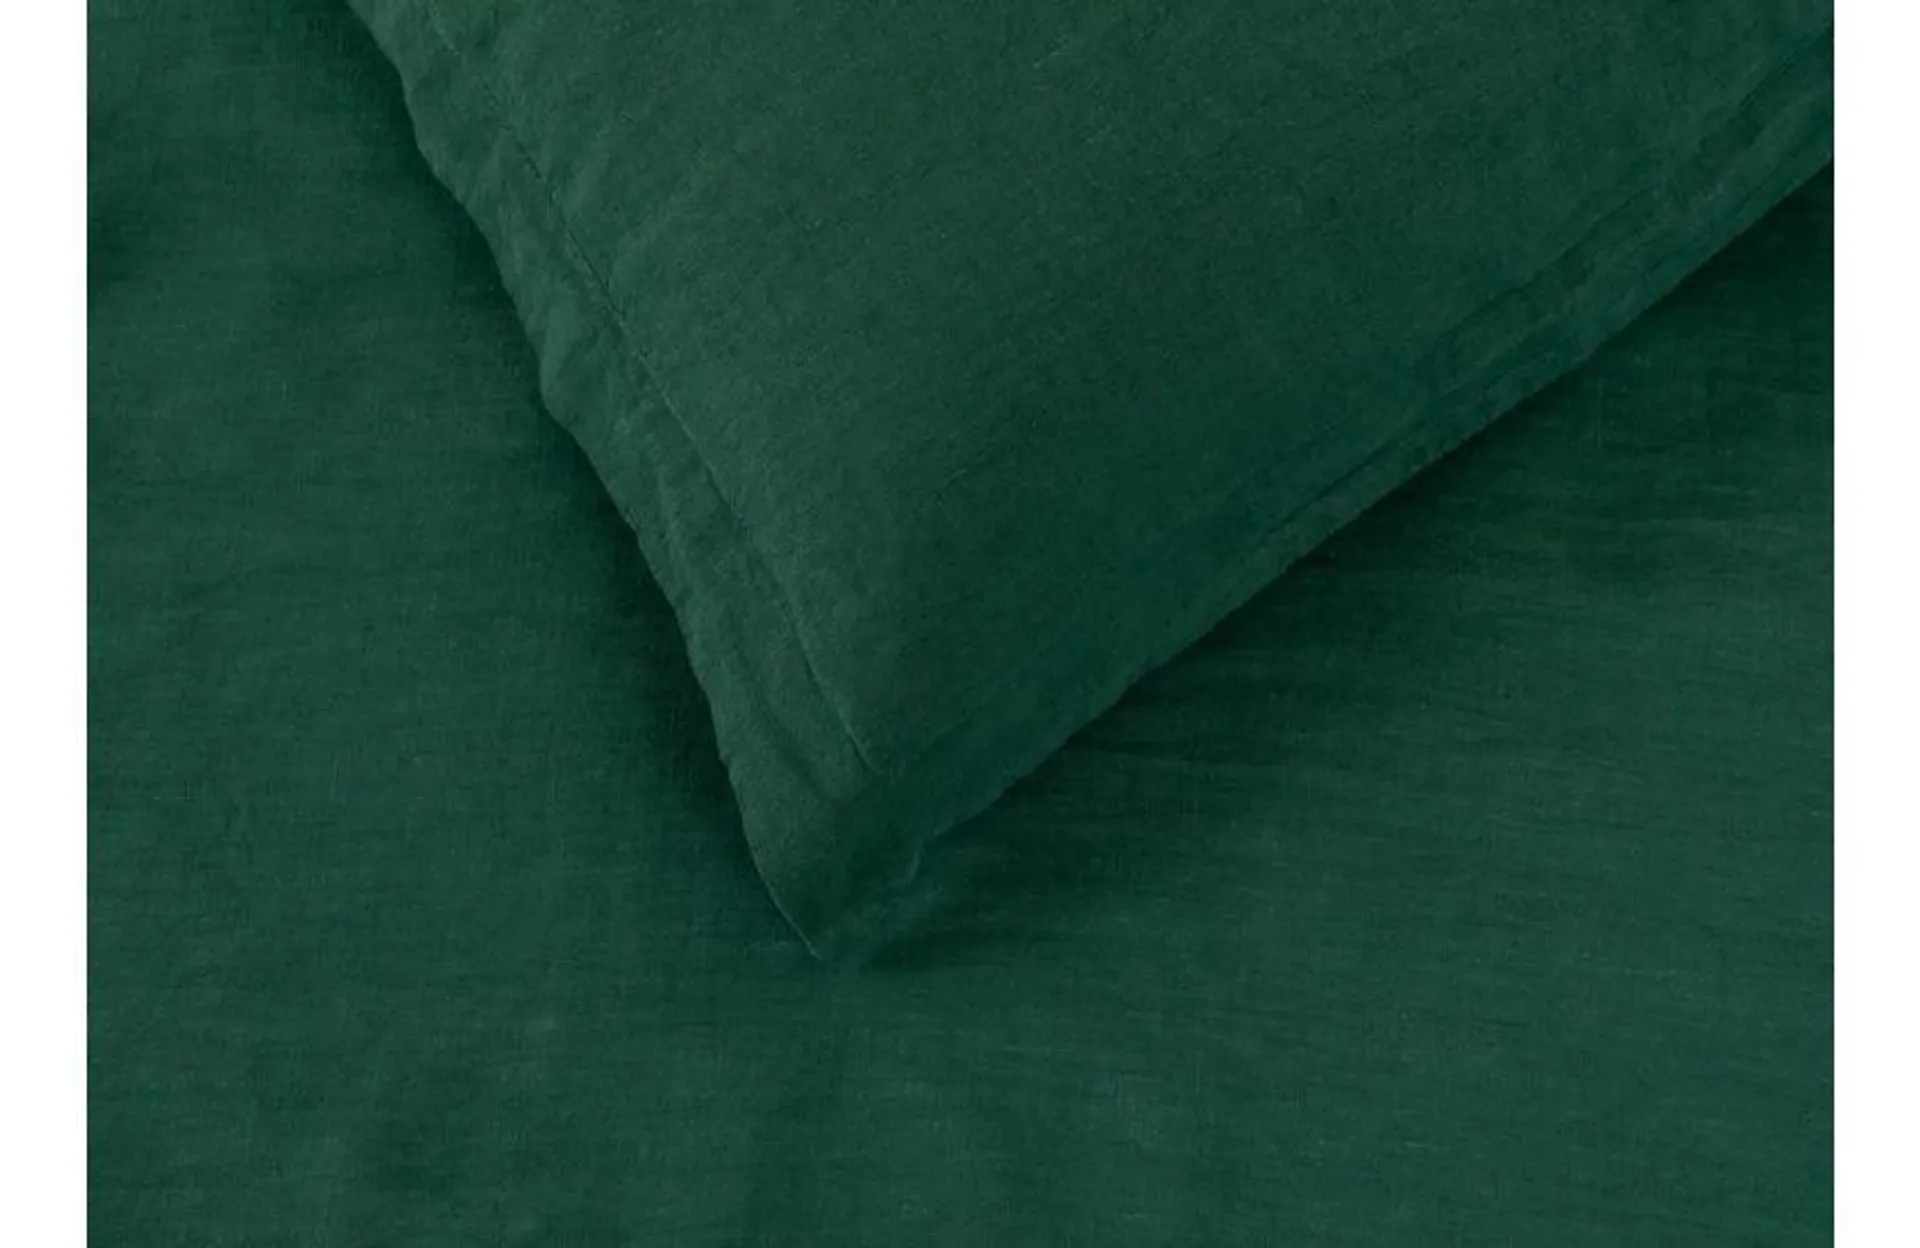 Washed Linen Forest Green Fitted Sheet Super King